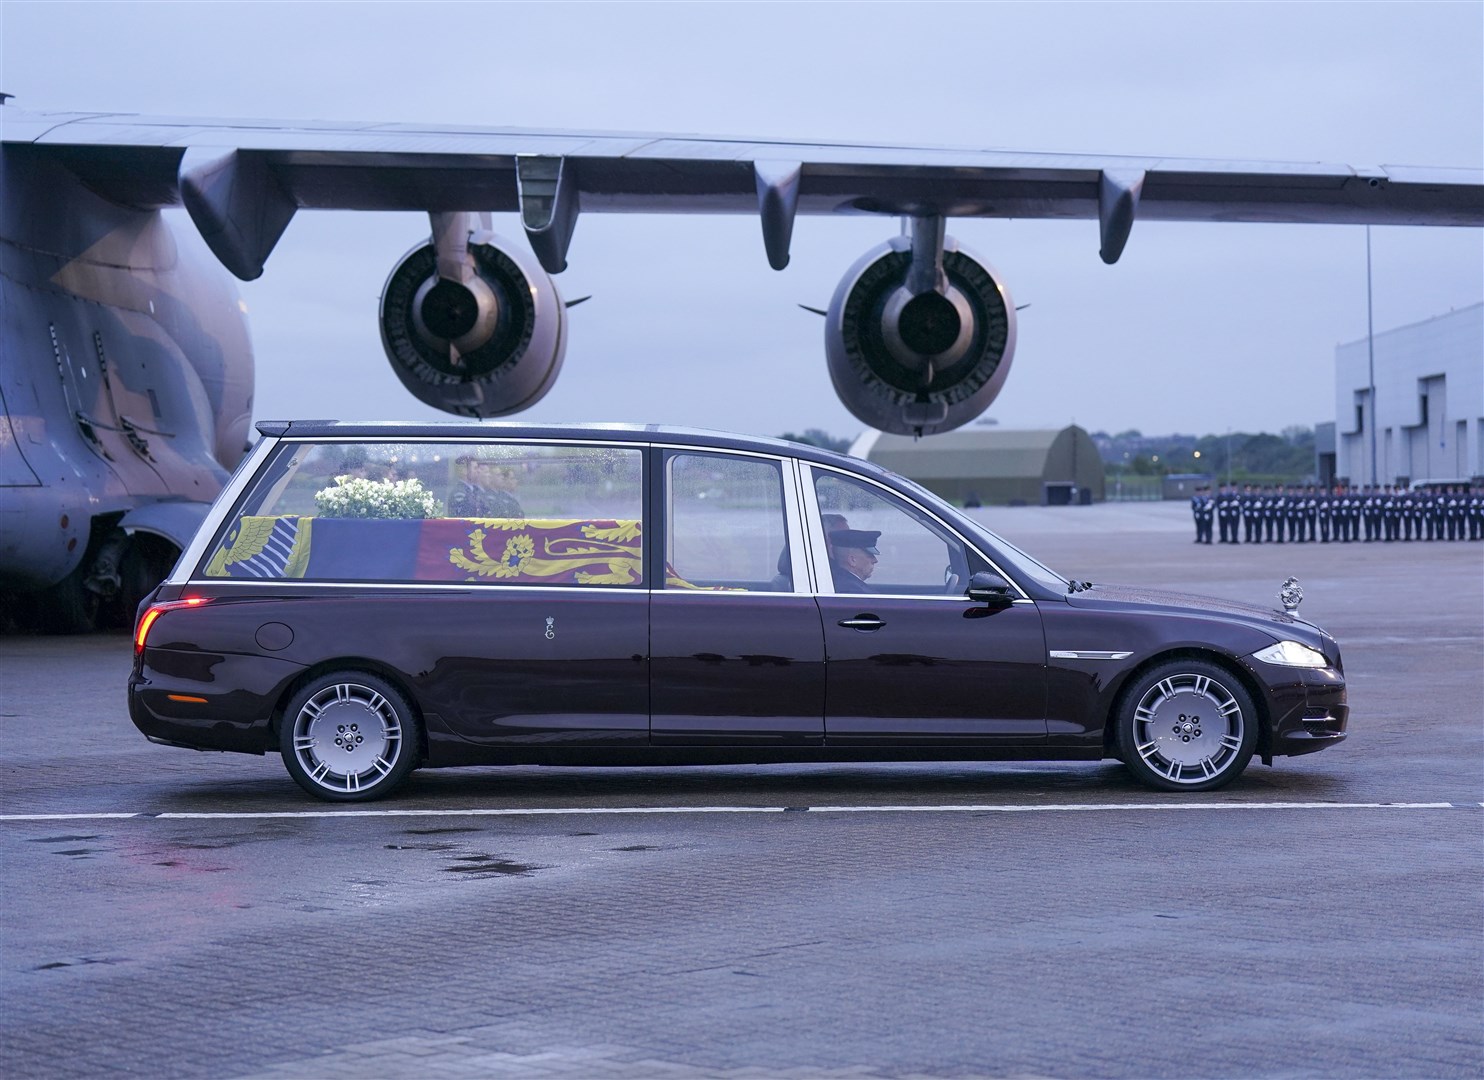 The hearse carrying the coffin of Queen Elizabeth II departs RAF Northolt (Arthur Edwards/the Sun/PA)